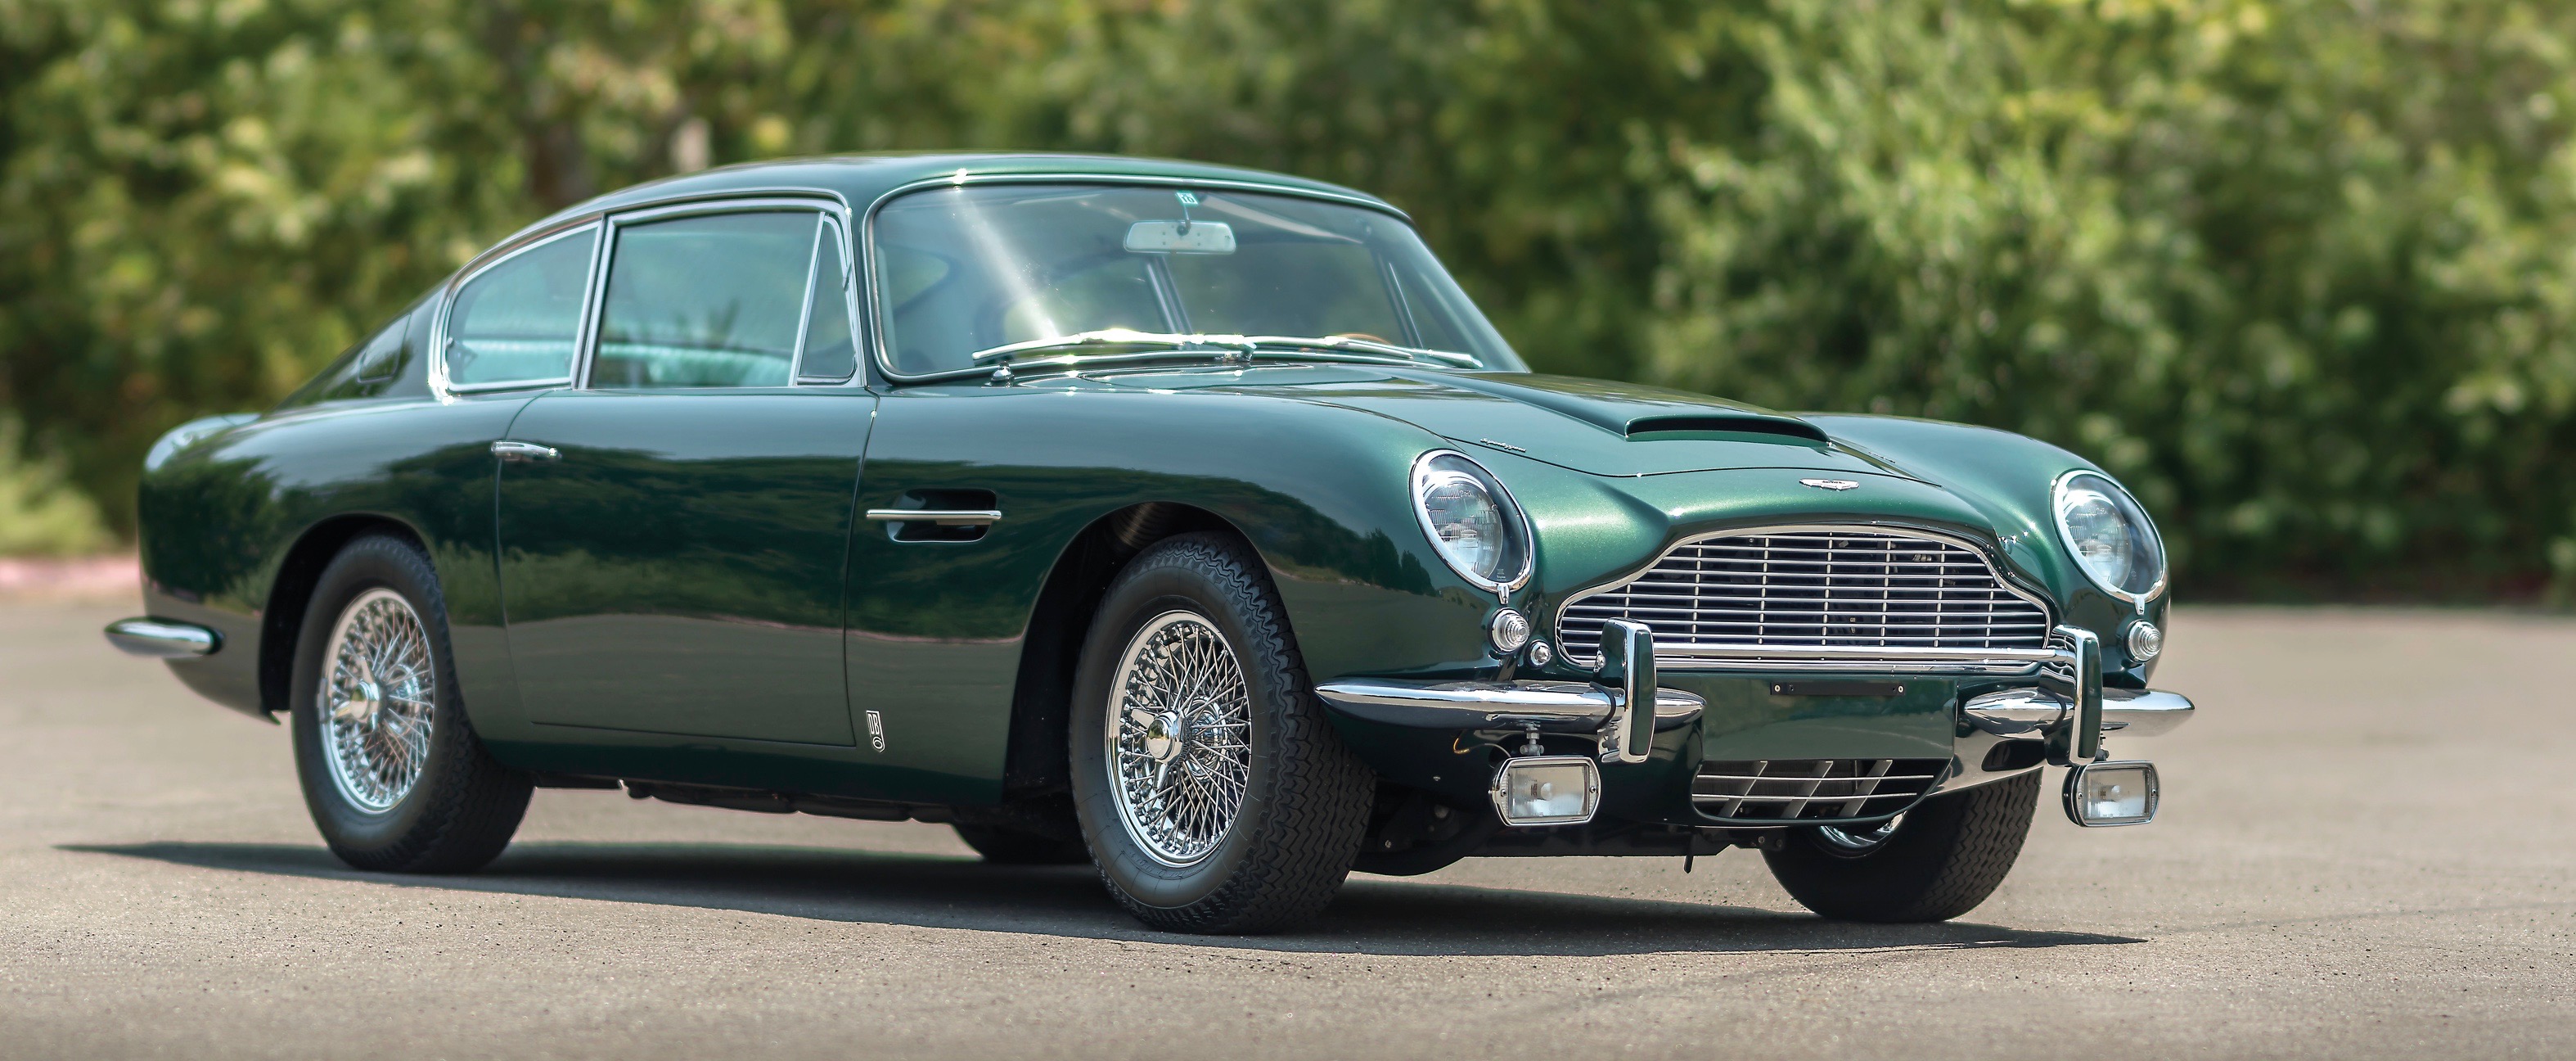 Aston Martin, Bond market: But 007 not the only reason Aston Martins hold value, ClassicCars.com Journal